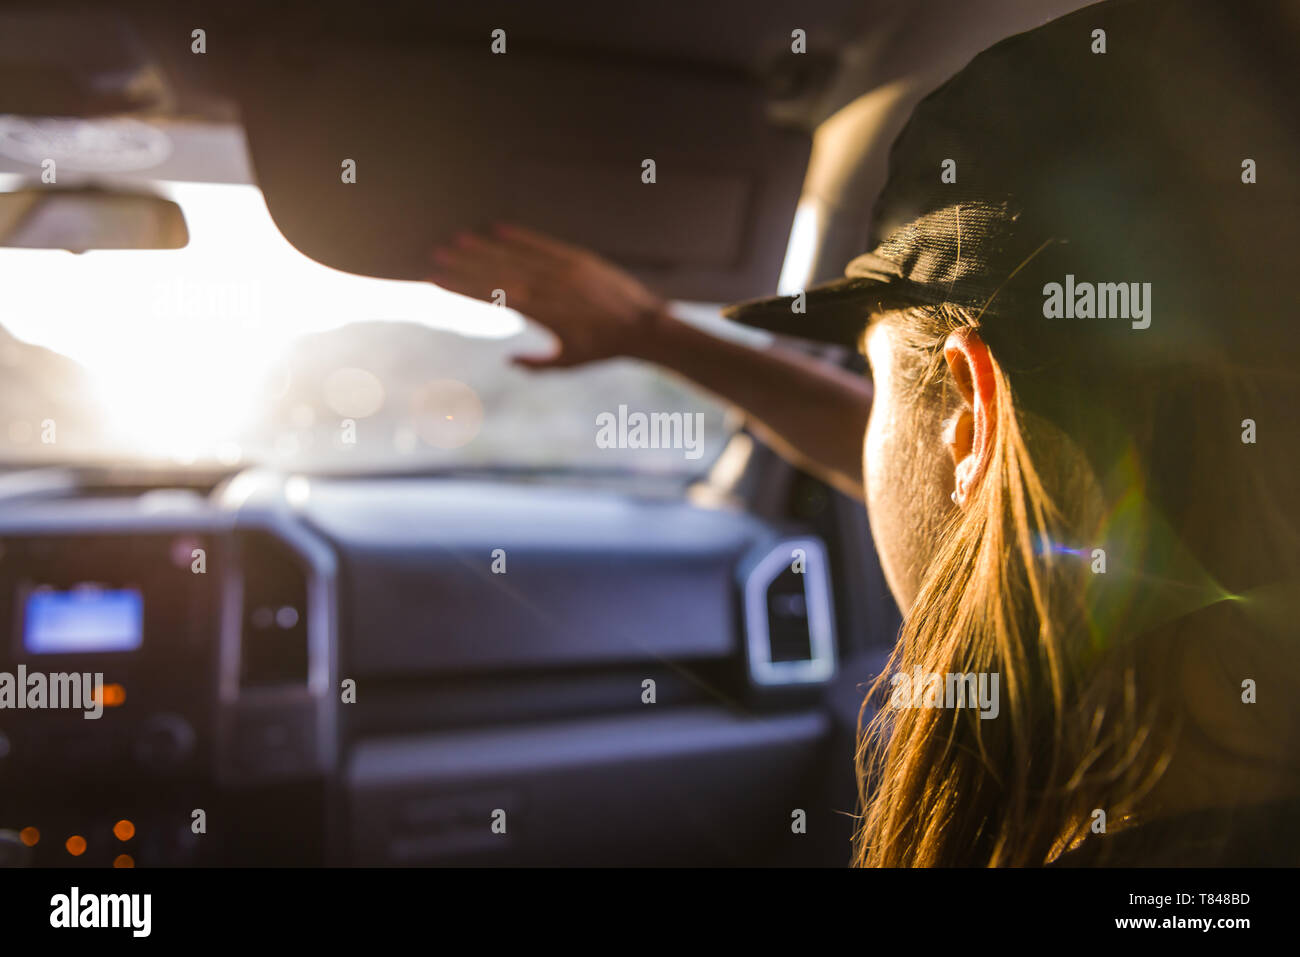 Woman passenger in front seat of car shielding eyes from sunlight, over shoulder view Stock Photo